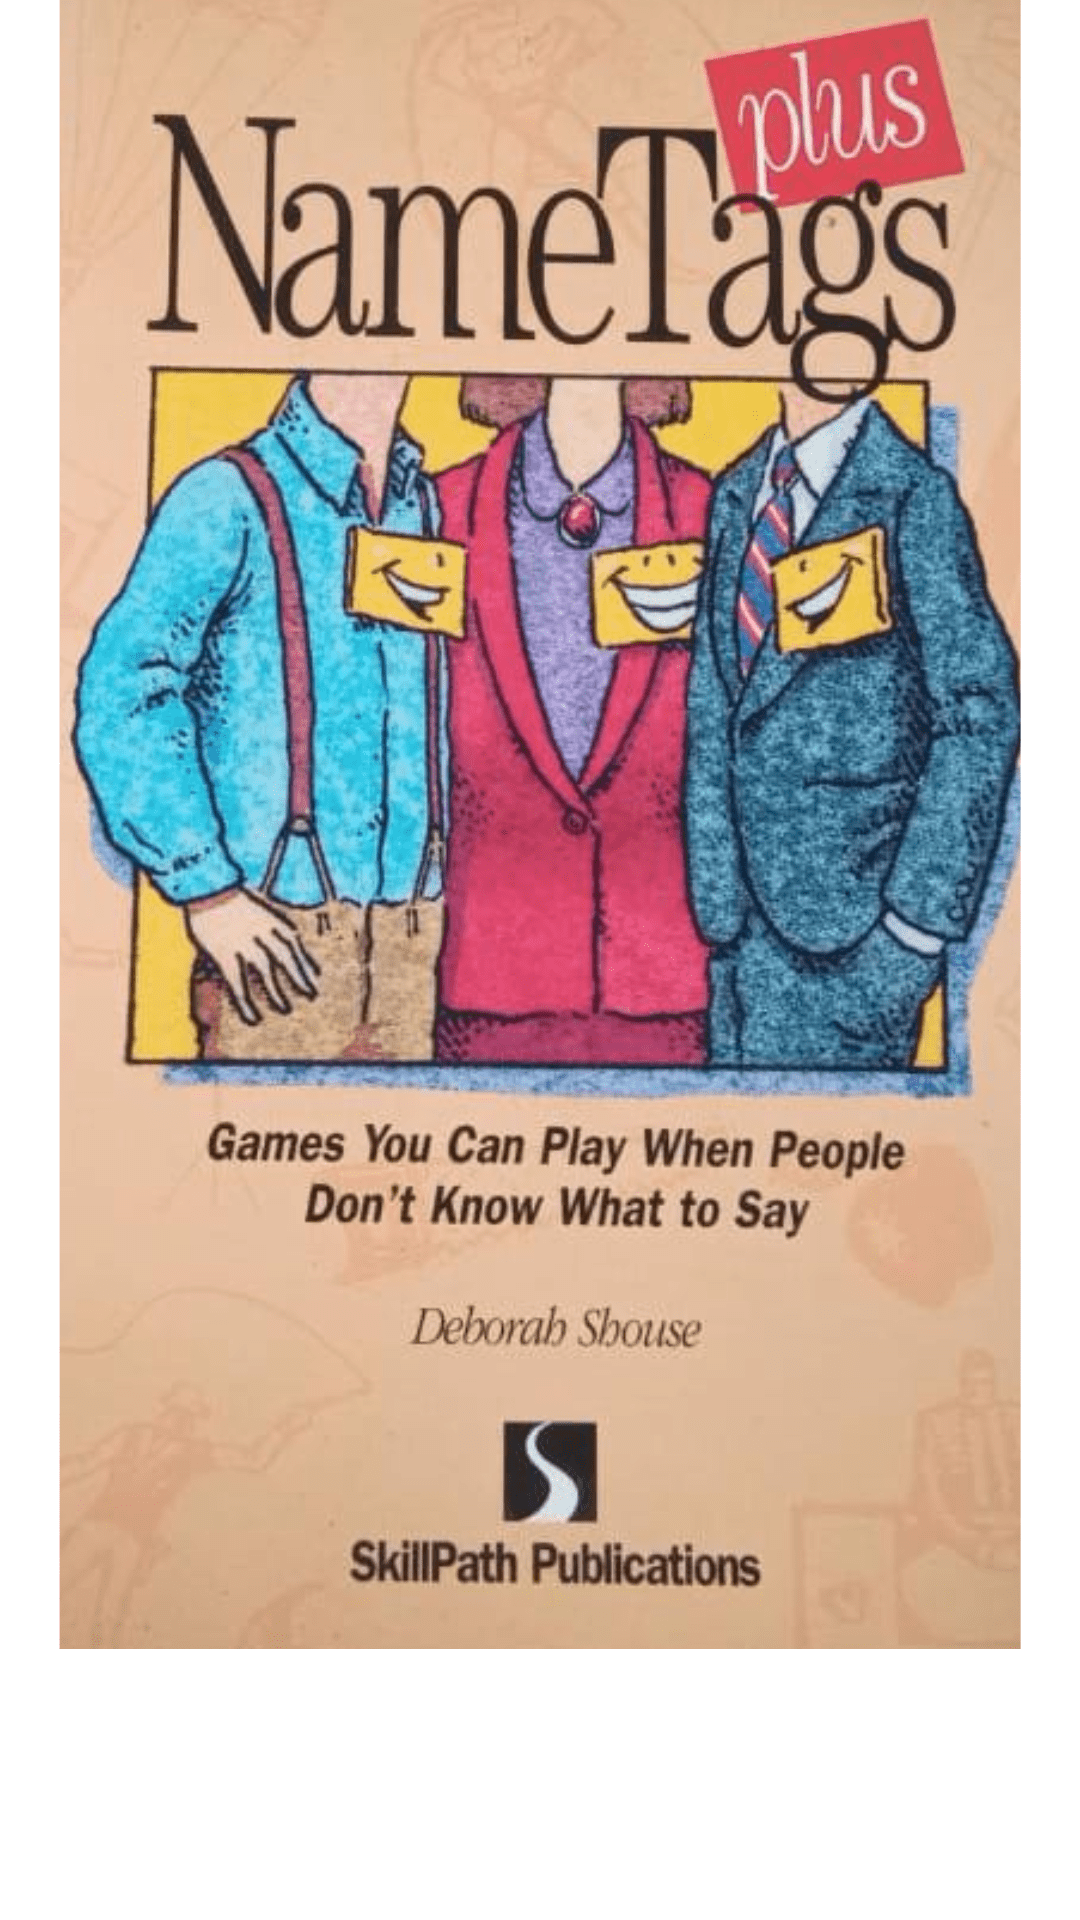 Nametags Plus: Games You Can Play When People Don't Know What to Say